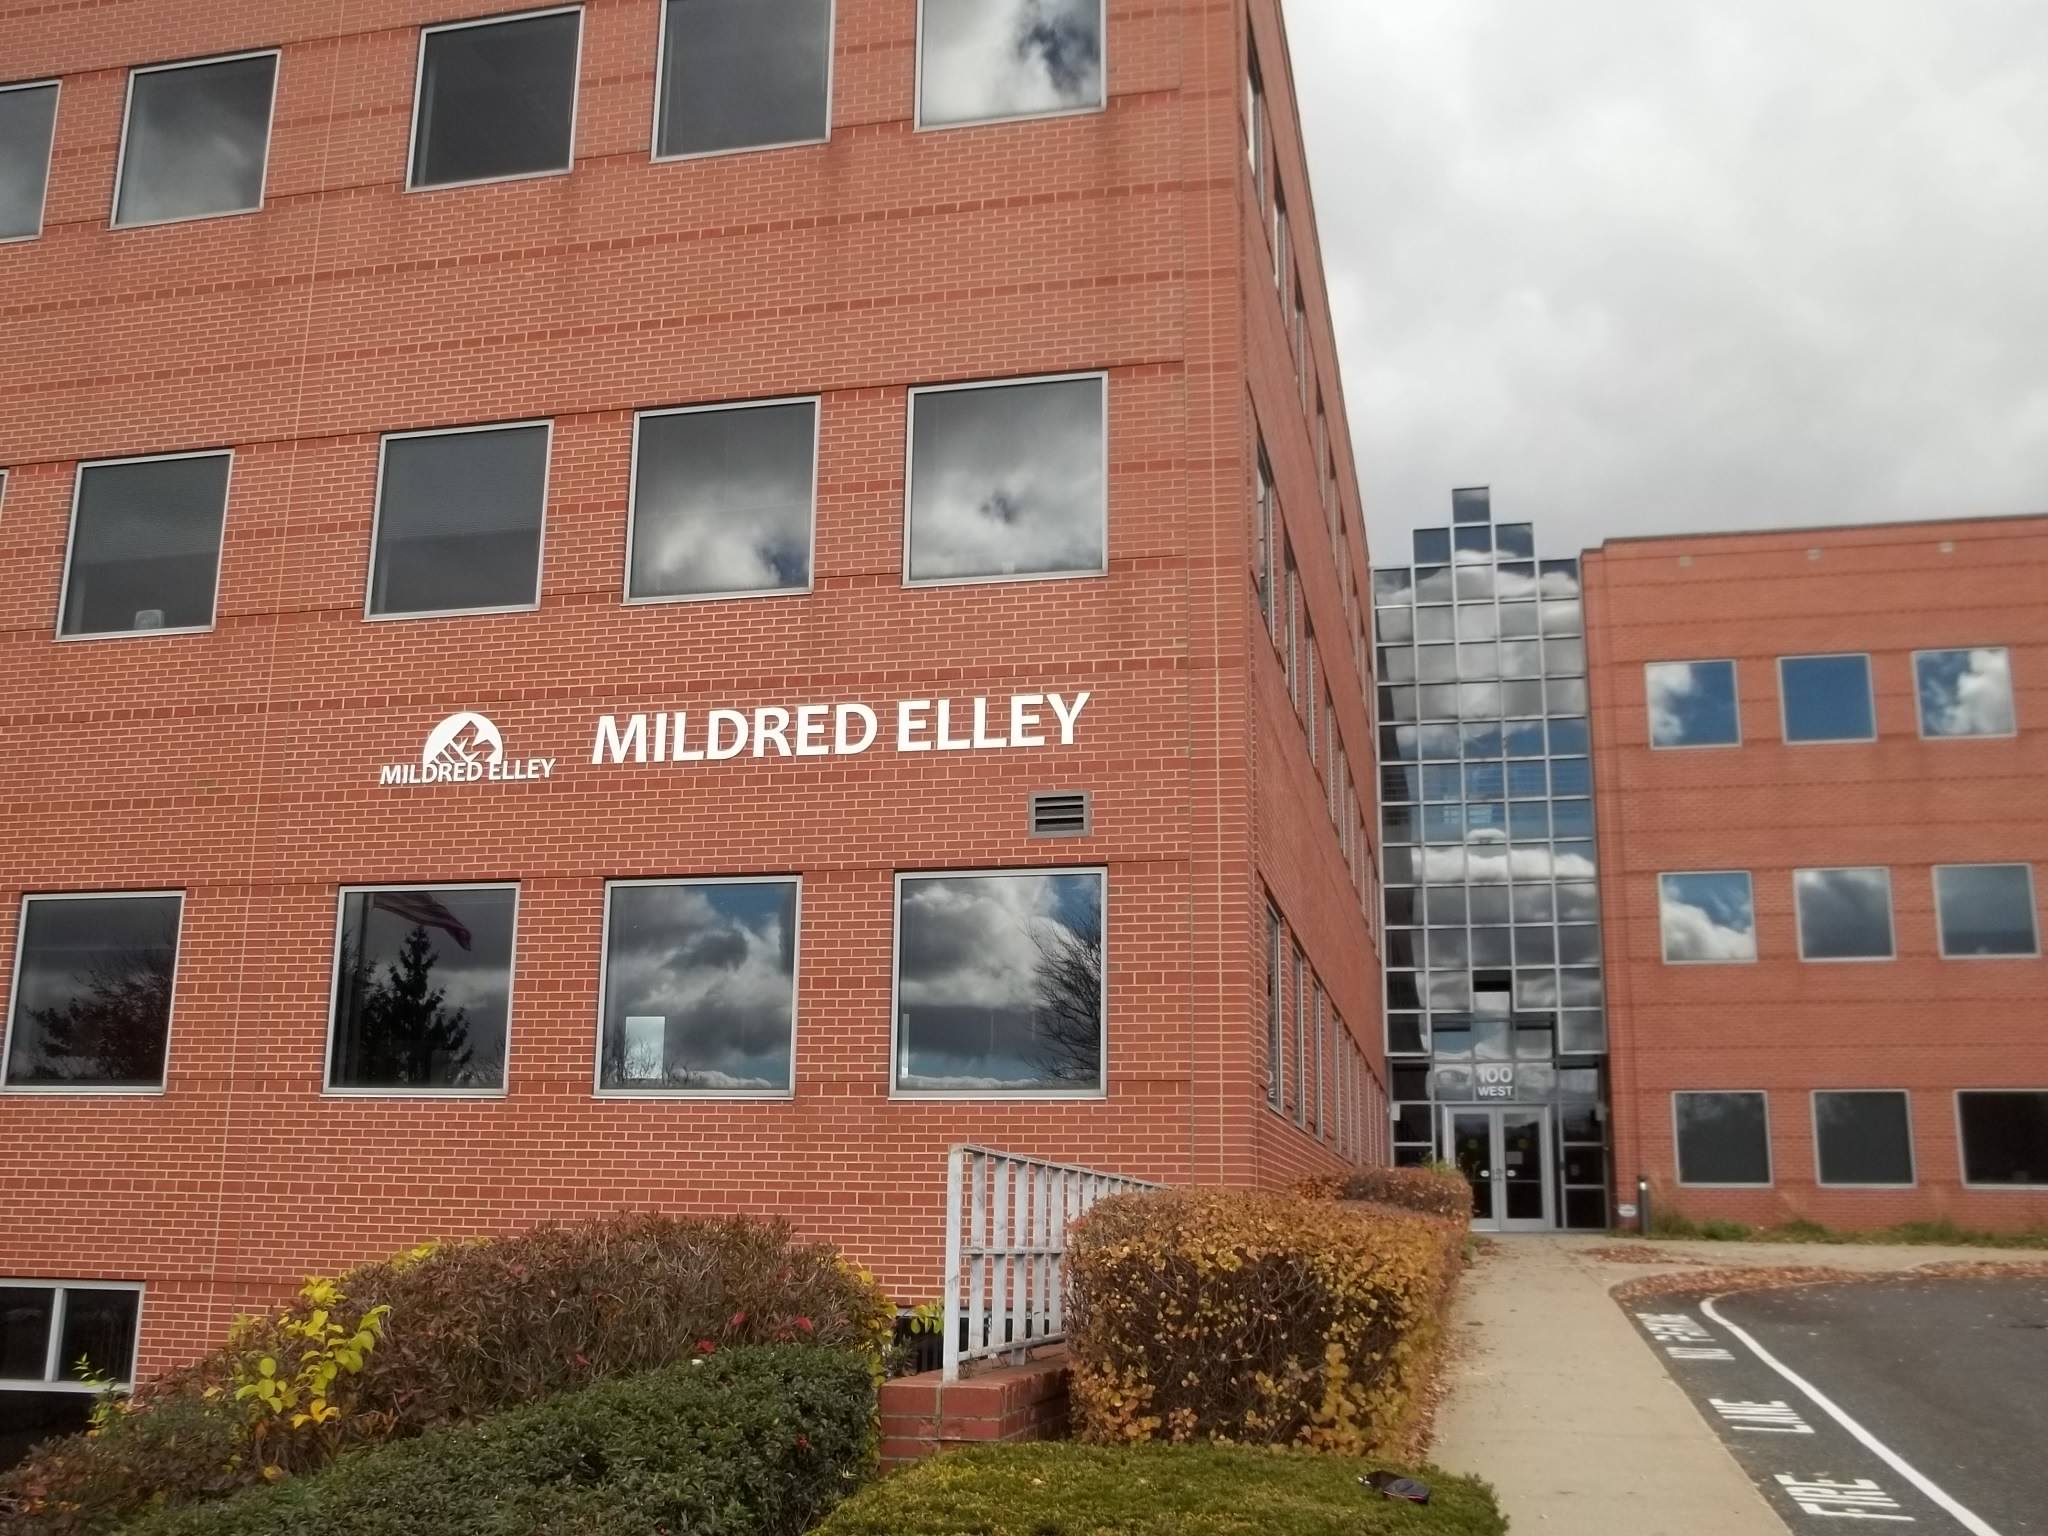 Mildred Elley Pittsfield MA Campus Certificate Programs